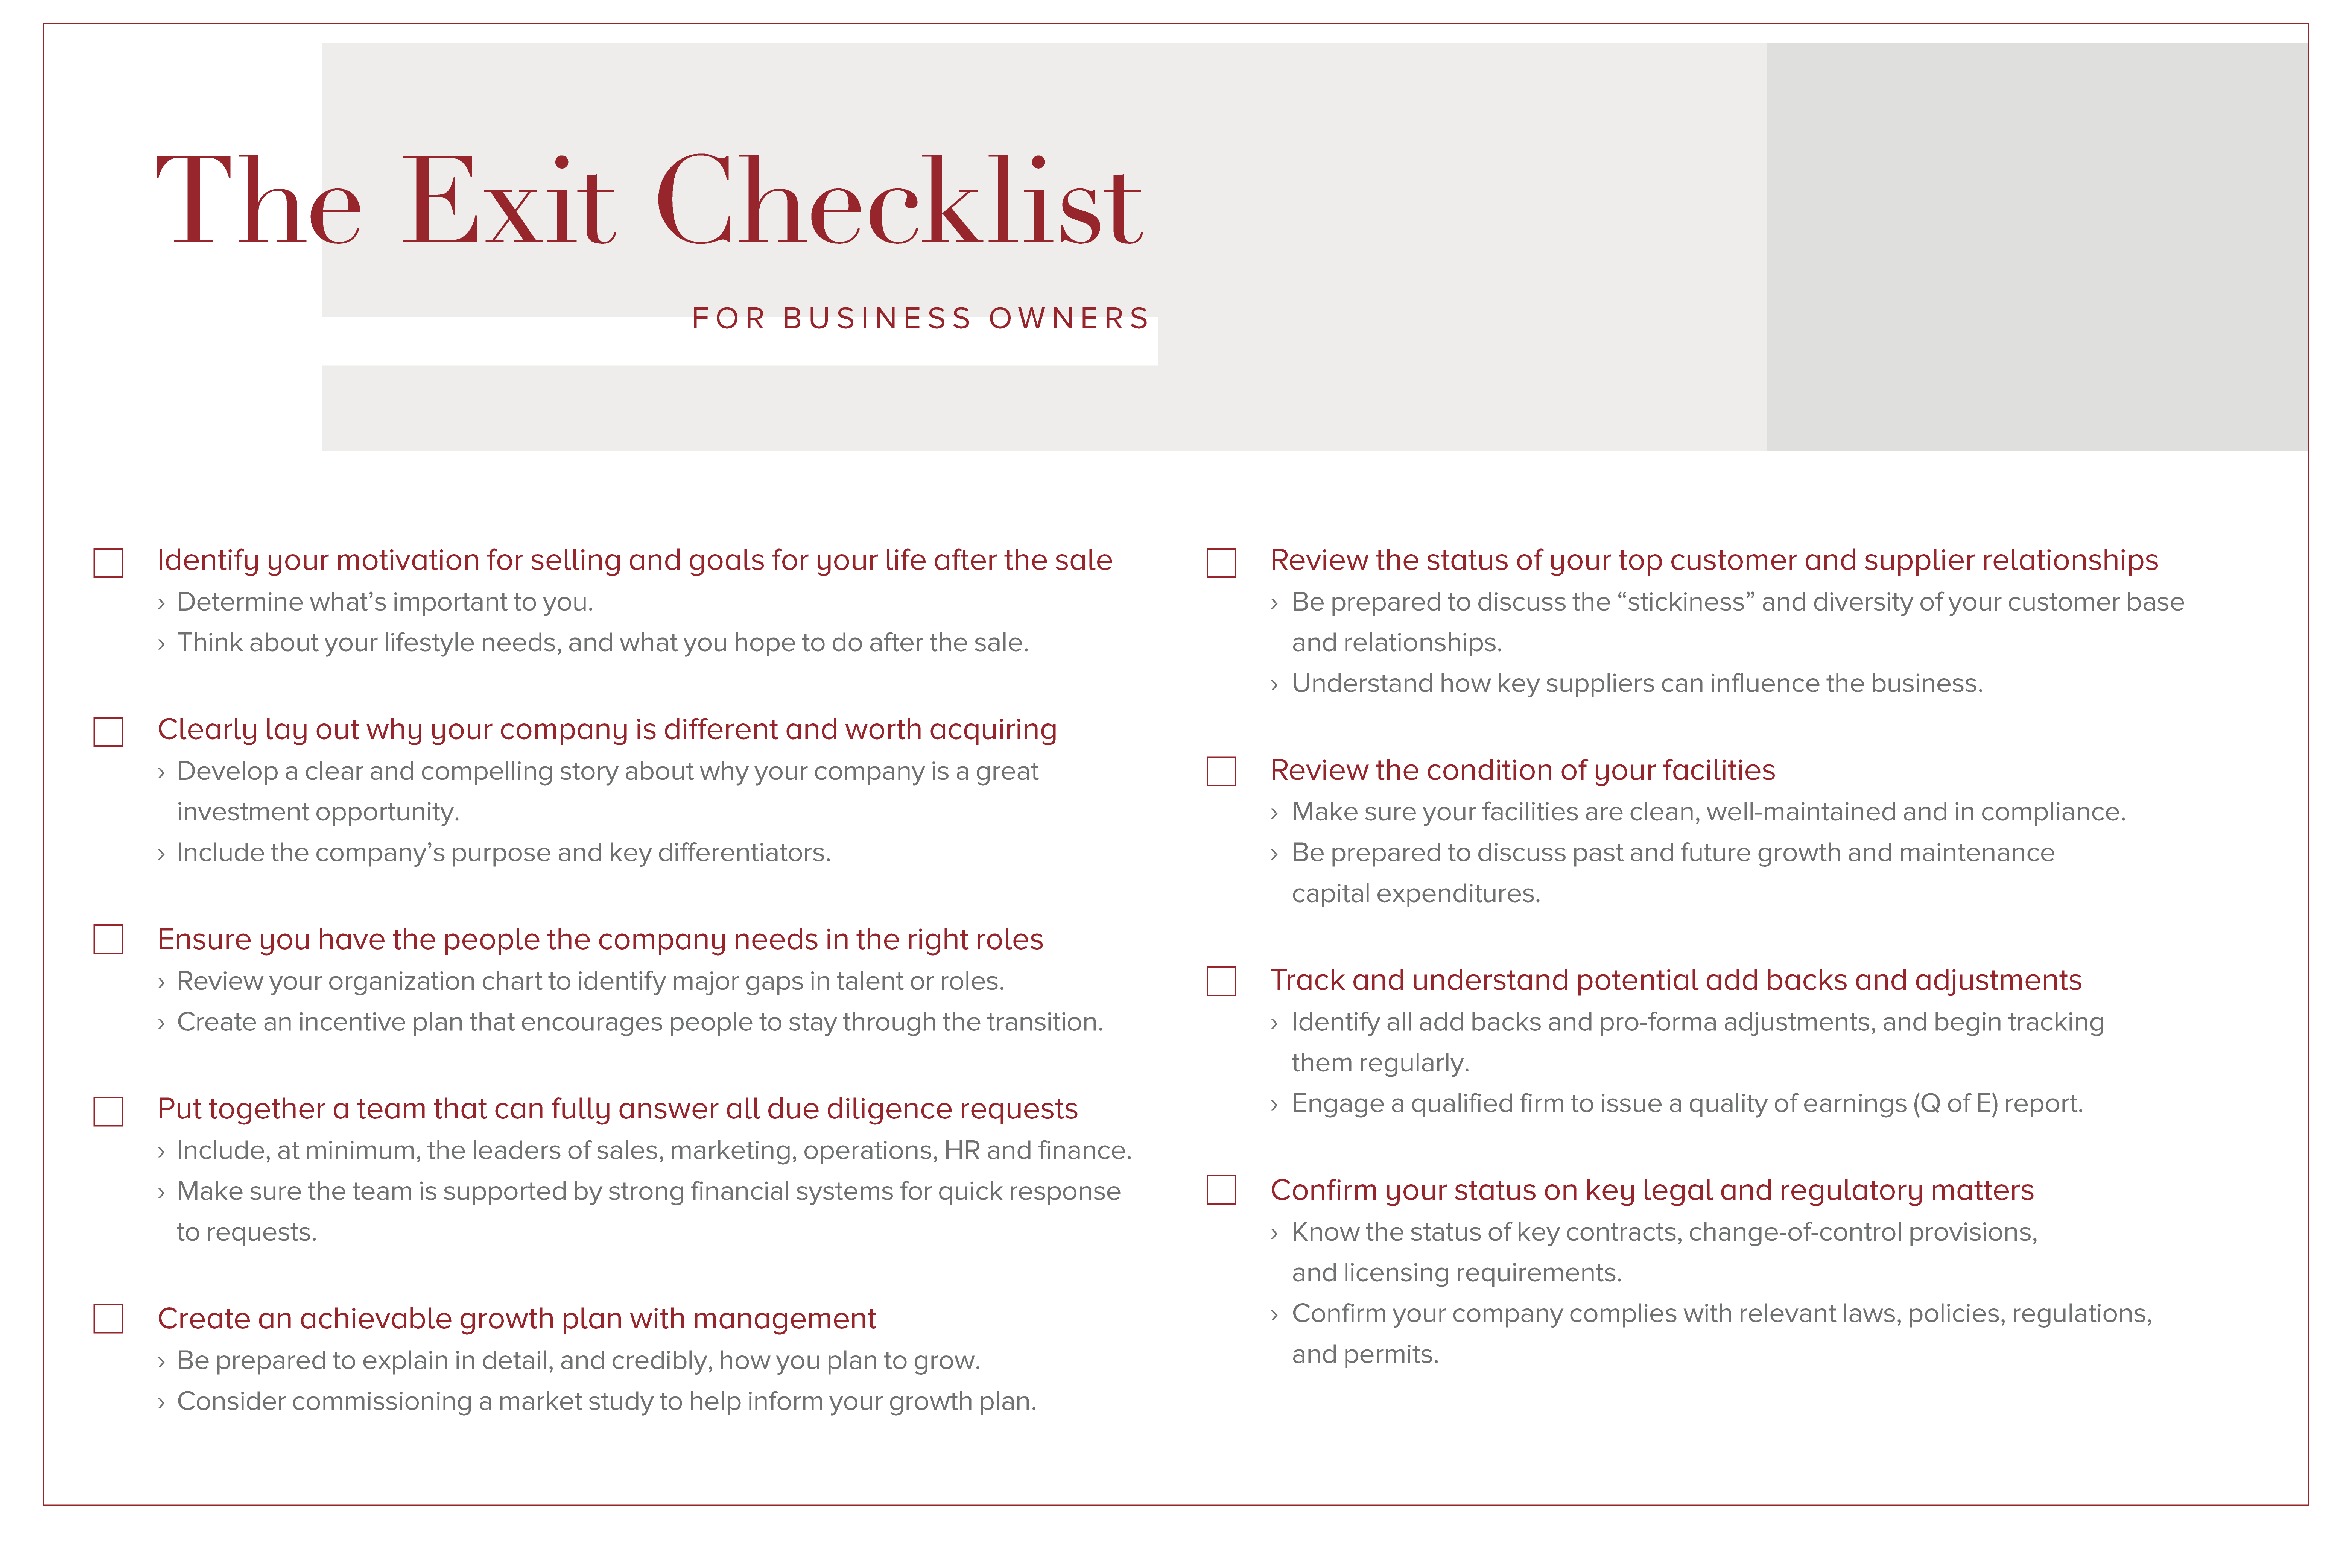 Exit planning? How do you know your business is ready for an exit?